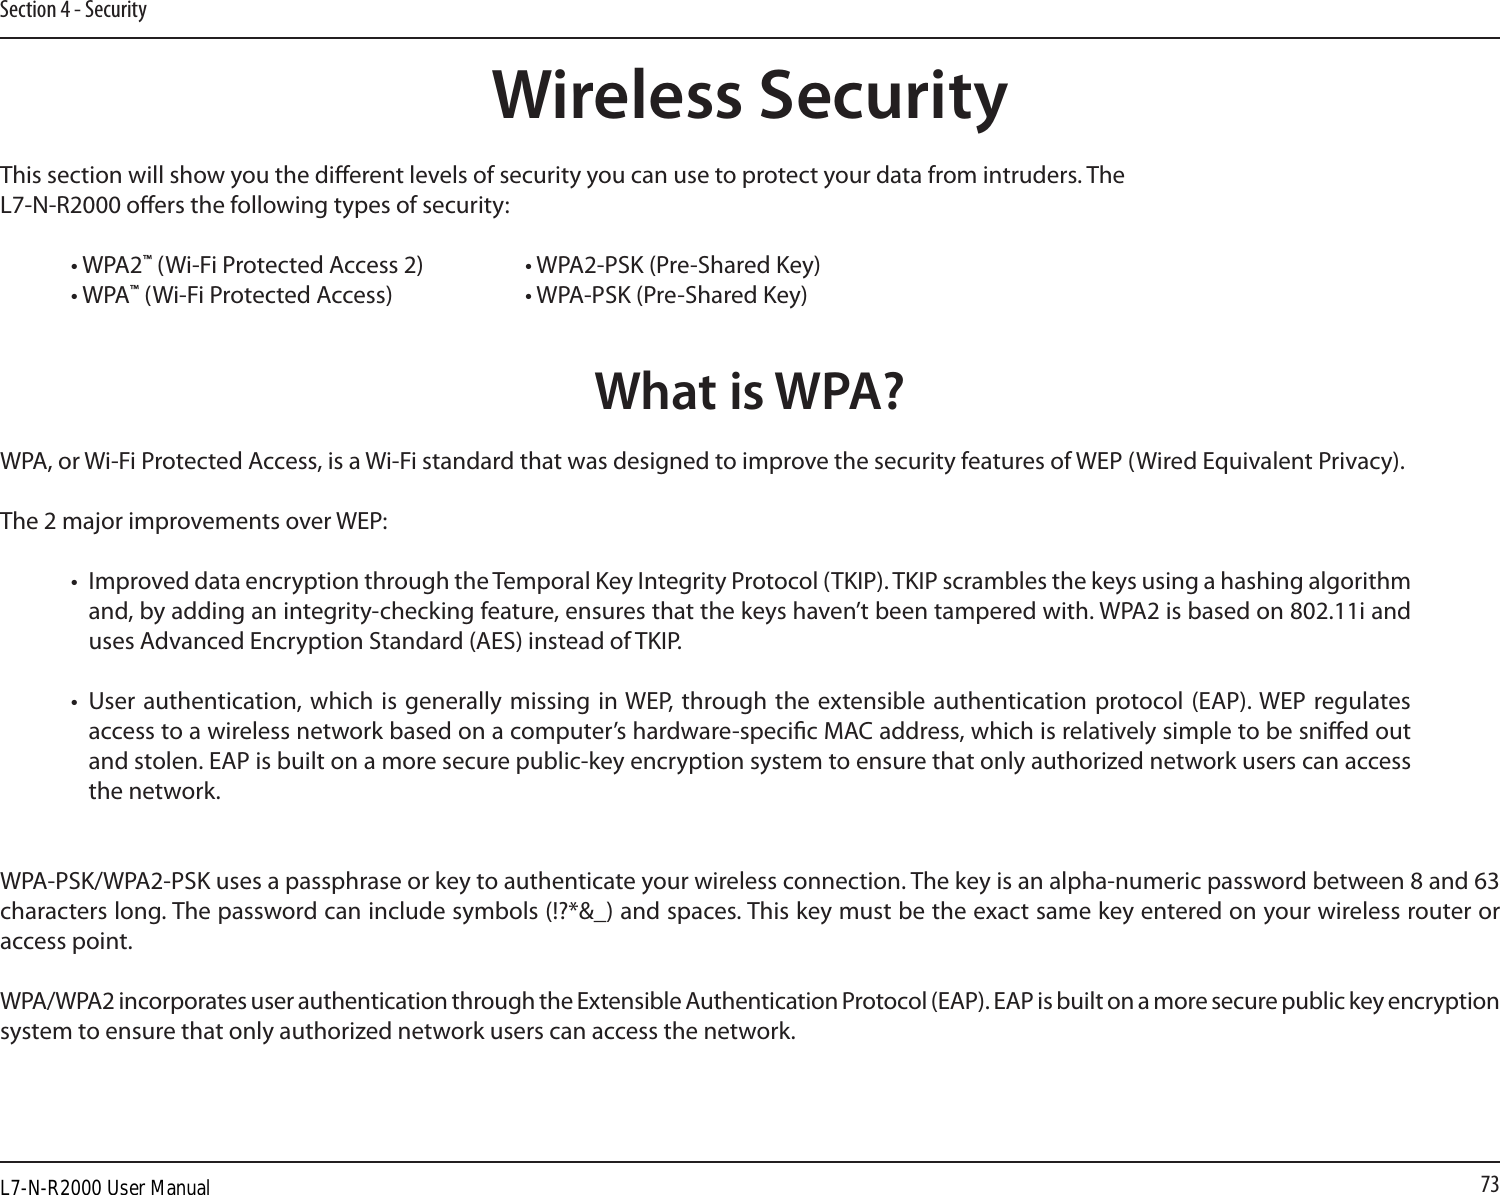 73Section 4 - SecurityWireless SecurityThis section will show you the dierent levels of security you can use to protect your data from intruders. The L7-N-R2000 oers the following types of security:• WPA2™ (Wi-Fi Protected Access 2)     • WPA2-PSK (Pre-Shared Key)• WPA™ (Wi-Fi Protected Access)    • WPA-PSK (Pre-Shared Key)What is WPA?WPA, or Wi-Fi Protected Access, is a Wi-Fi standard that was designed to improve the security features of WEP (Wired Equivalent Privacy).  The 2 major improvements over WEP: •  Improved data encryption through the Temporal Key Integrity Protocol (TKIP). TKIP scrambles the keys using a hashing algorithm and, by adding an integrity-checking feature, ensures that the keys haven’t been tampered with. WPA2 is based on 802.11i and uses Advanced Encryption Standard (AES) instead of TKIP.•  User authentication, which is generally missing in WEP, through the  extensible authentication protocol (EAP). WEP regulates access to a wireless network based on a computer’s hardware-specic MAC address, which is relatively simple to be snied out and stolen. EAP is built on a more secure public-key encryption system to ensure that only authorized network users can access the network.WPA-PSK/WPA2-PSK uses a passphrase or key to authenticate your wireless connection. The key is an alpha-numeric password between 8 and 63 characters long. The password can include symbols (!?*&amp;_) and spaces. This key must be the exact same key entered on your wireless router or access point.WPA/WPA2 incorporates user authentication through the Extensible Authentication Protocol (EAP). EAP is built on a more secure public key encryption system to ensure that only authorized network users can access the network.L7-N-R2000 User Manual